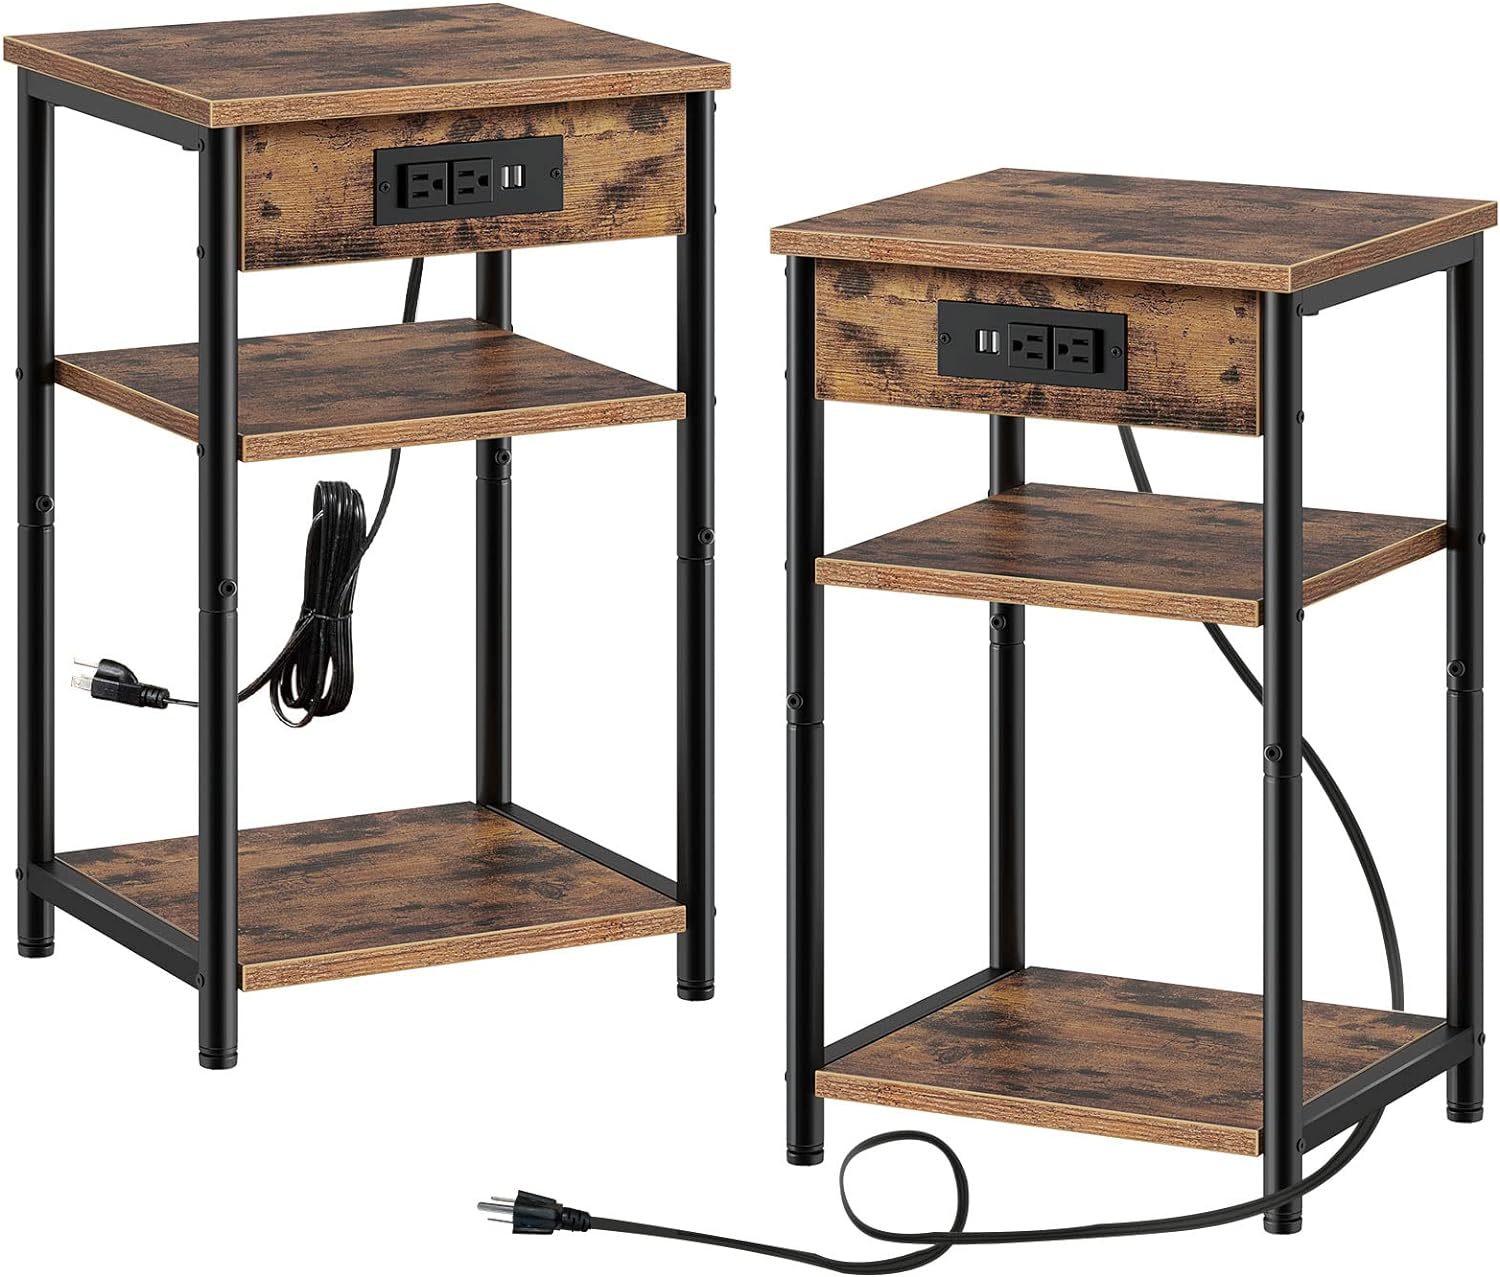 Primary image for With A Steel Frame And A Rustic Brown Finish, The Rolanstar End Table With